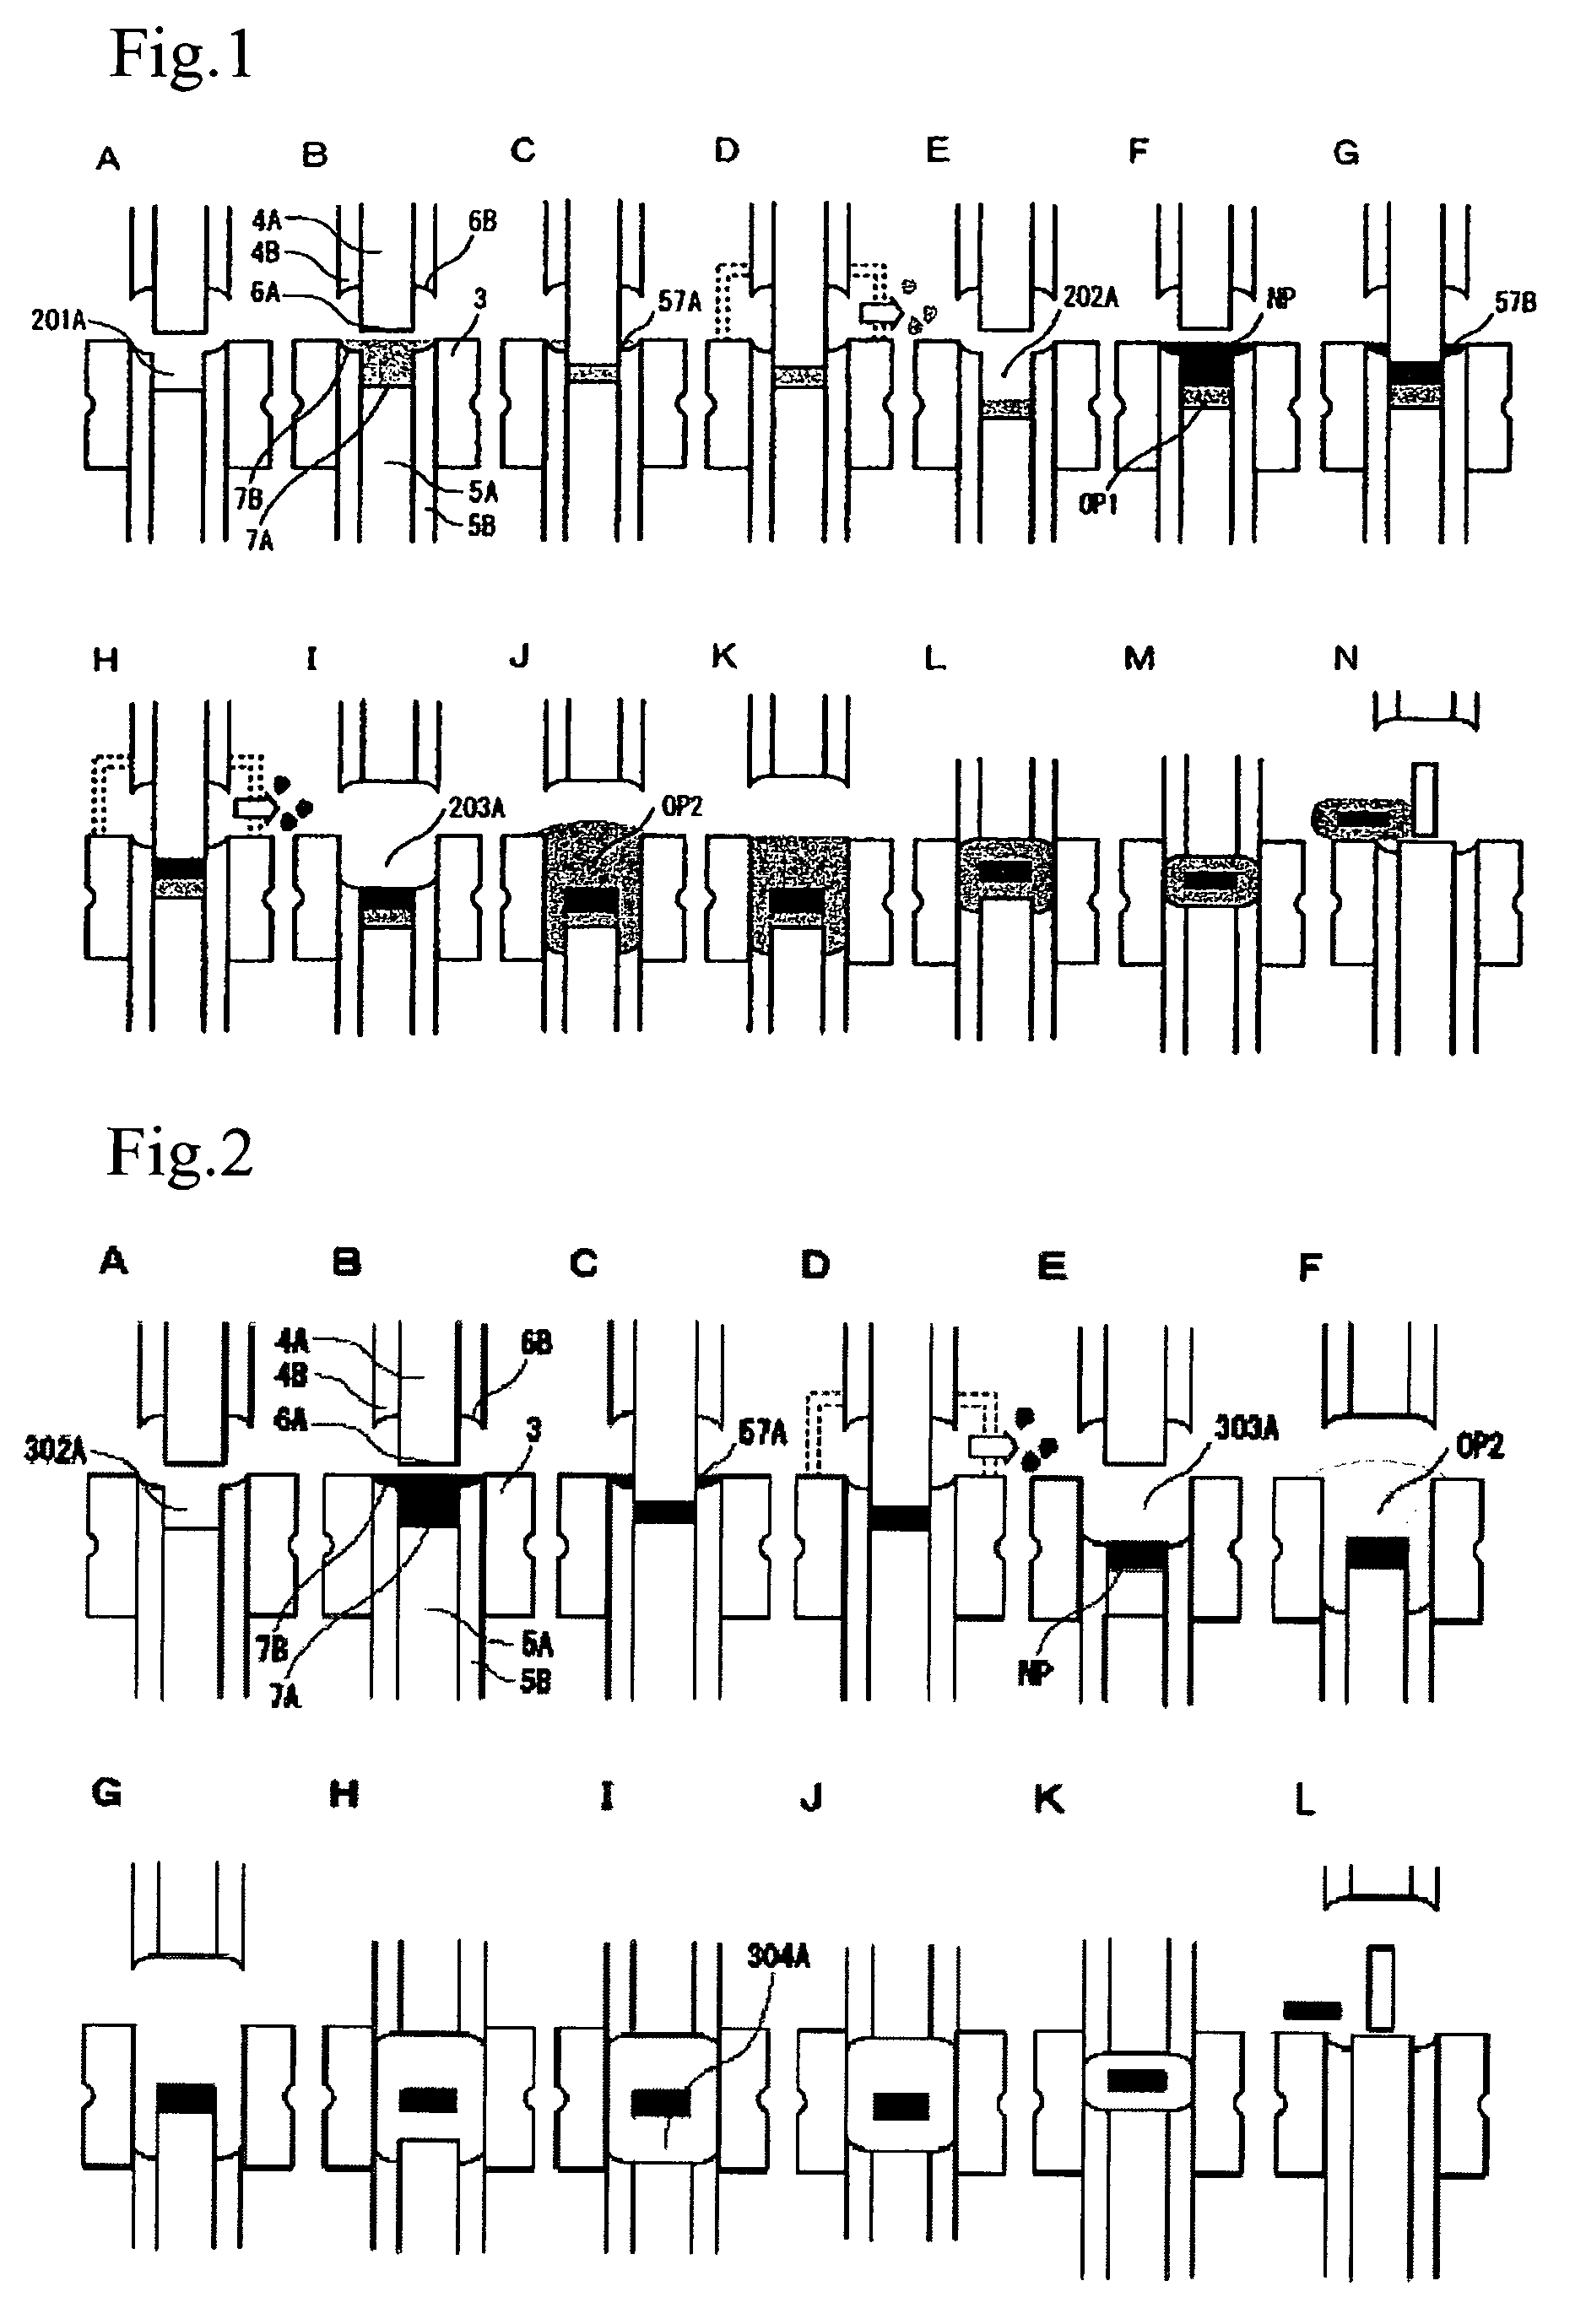 Method of manufacturing a molding with a core